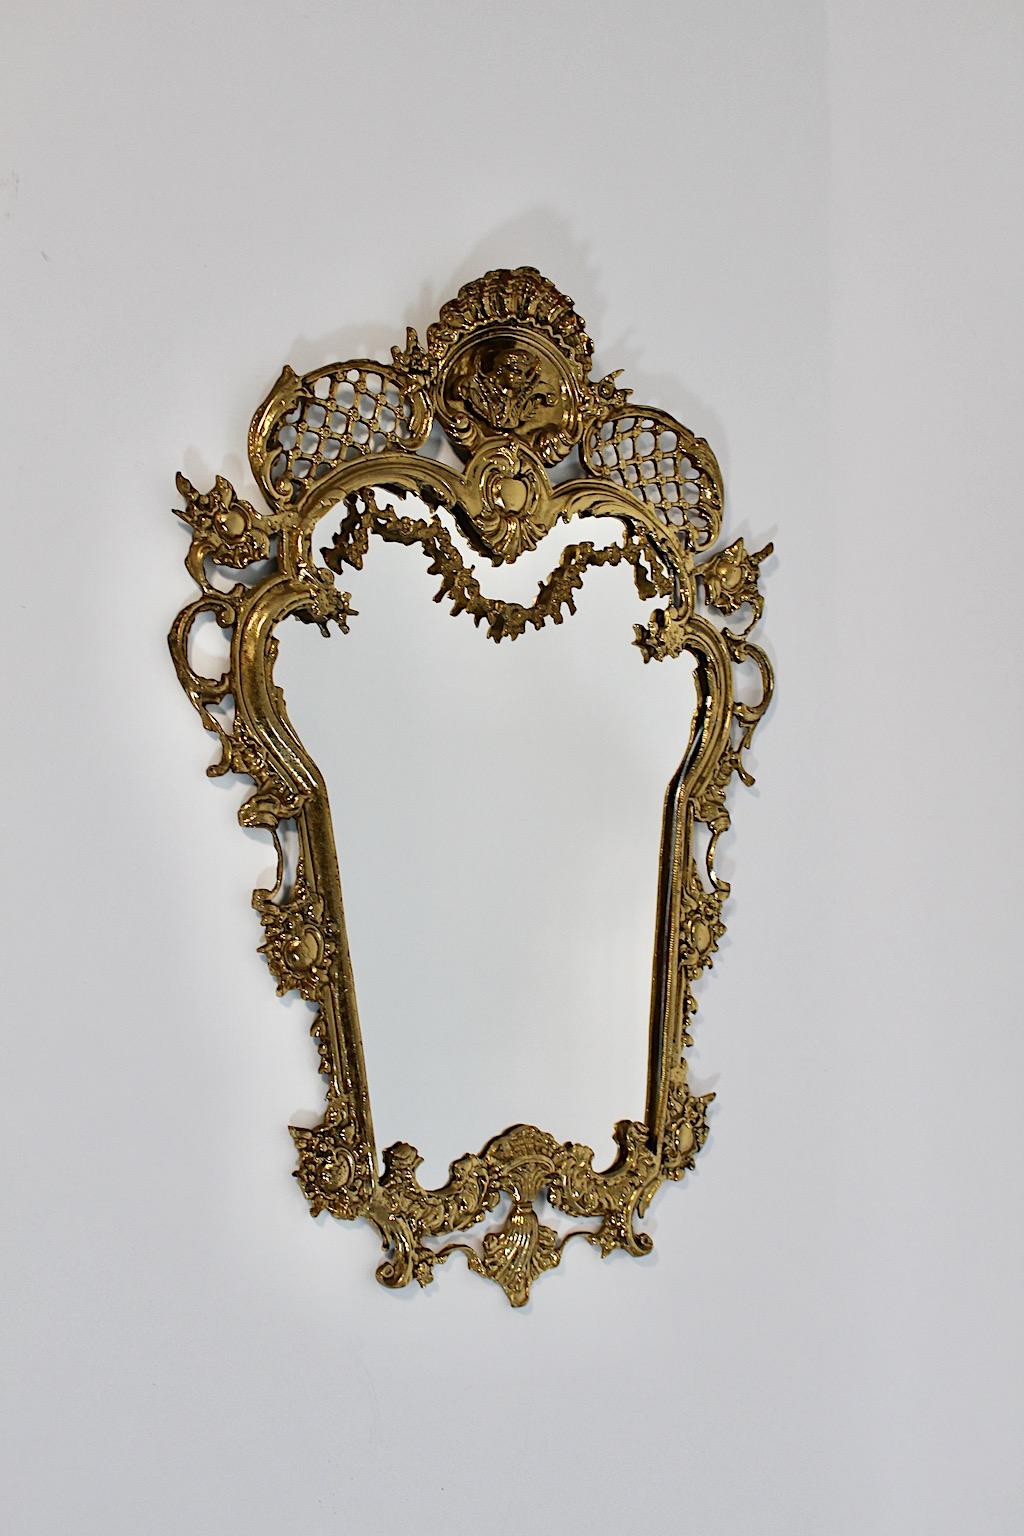 Modern brass vintage wall mirror in the style of baroque revival from cast brass and mirror glass Italy 1970s.
A stunning wall mirror from cast brass richly decorated with flower garlandes, angels and ornaments a a wonderful warm golden tone.
This